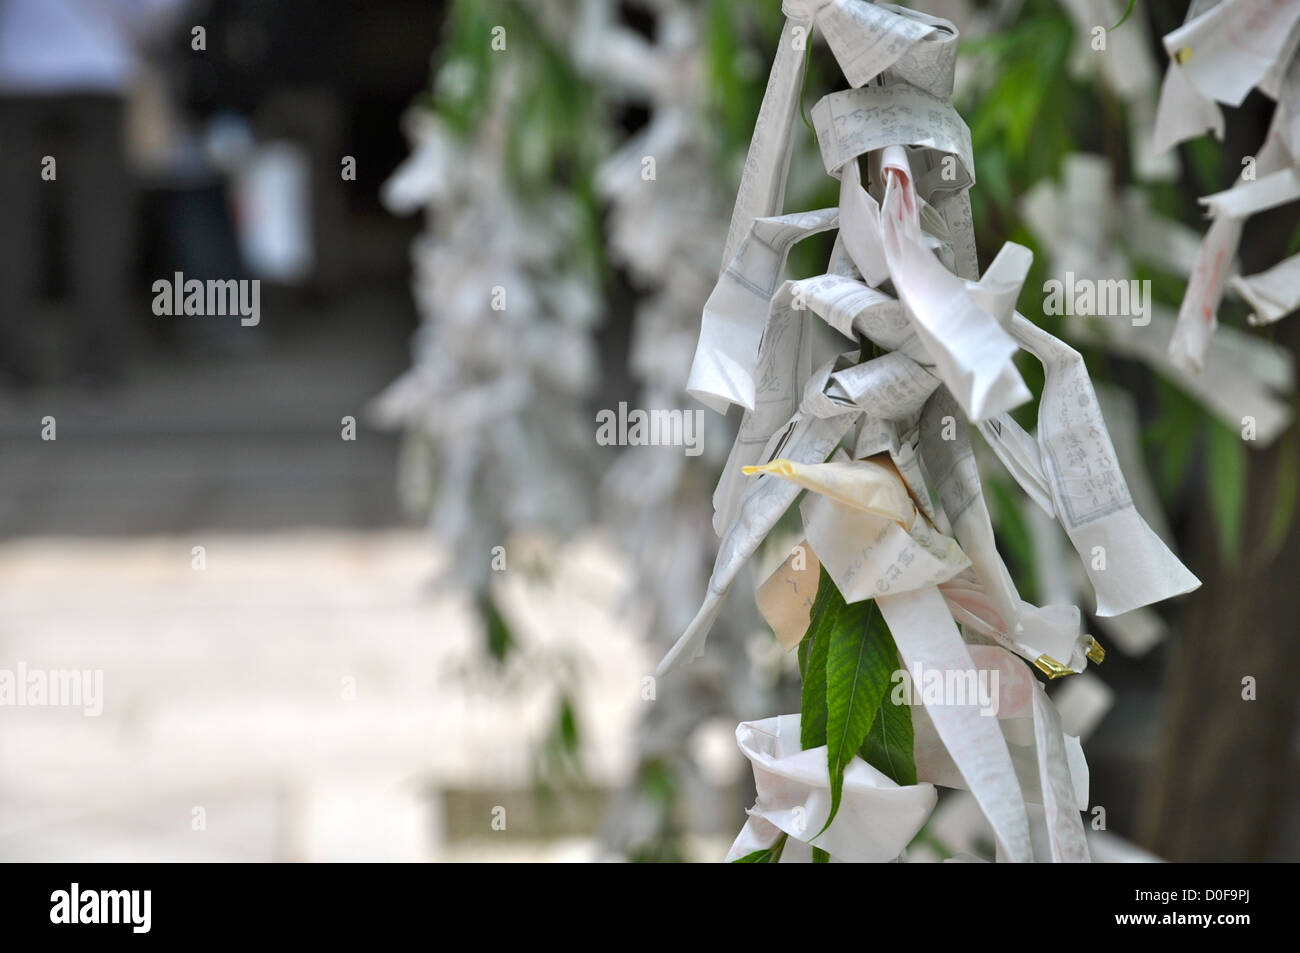 Paper prayers tied to a tree at a Shinto shrine in Kyoto, Japan. Stock Photo